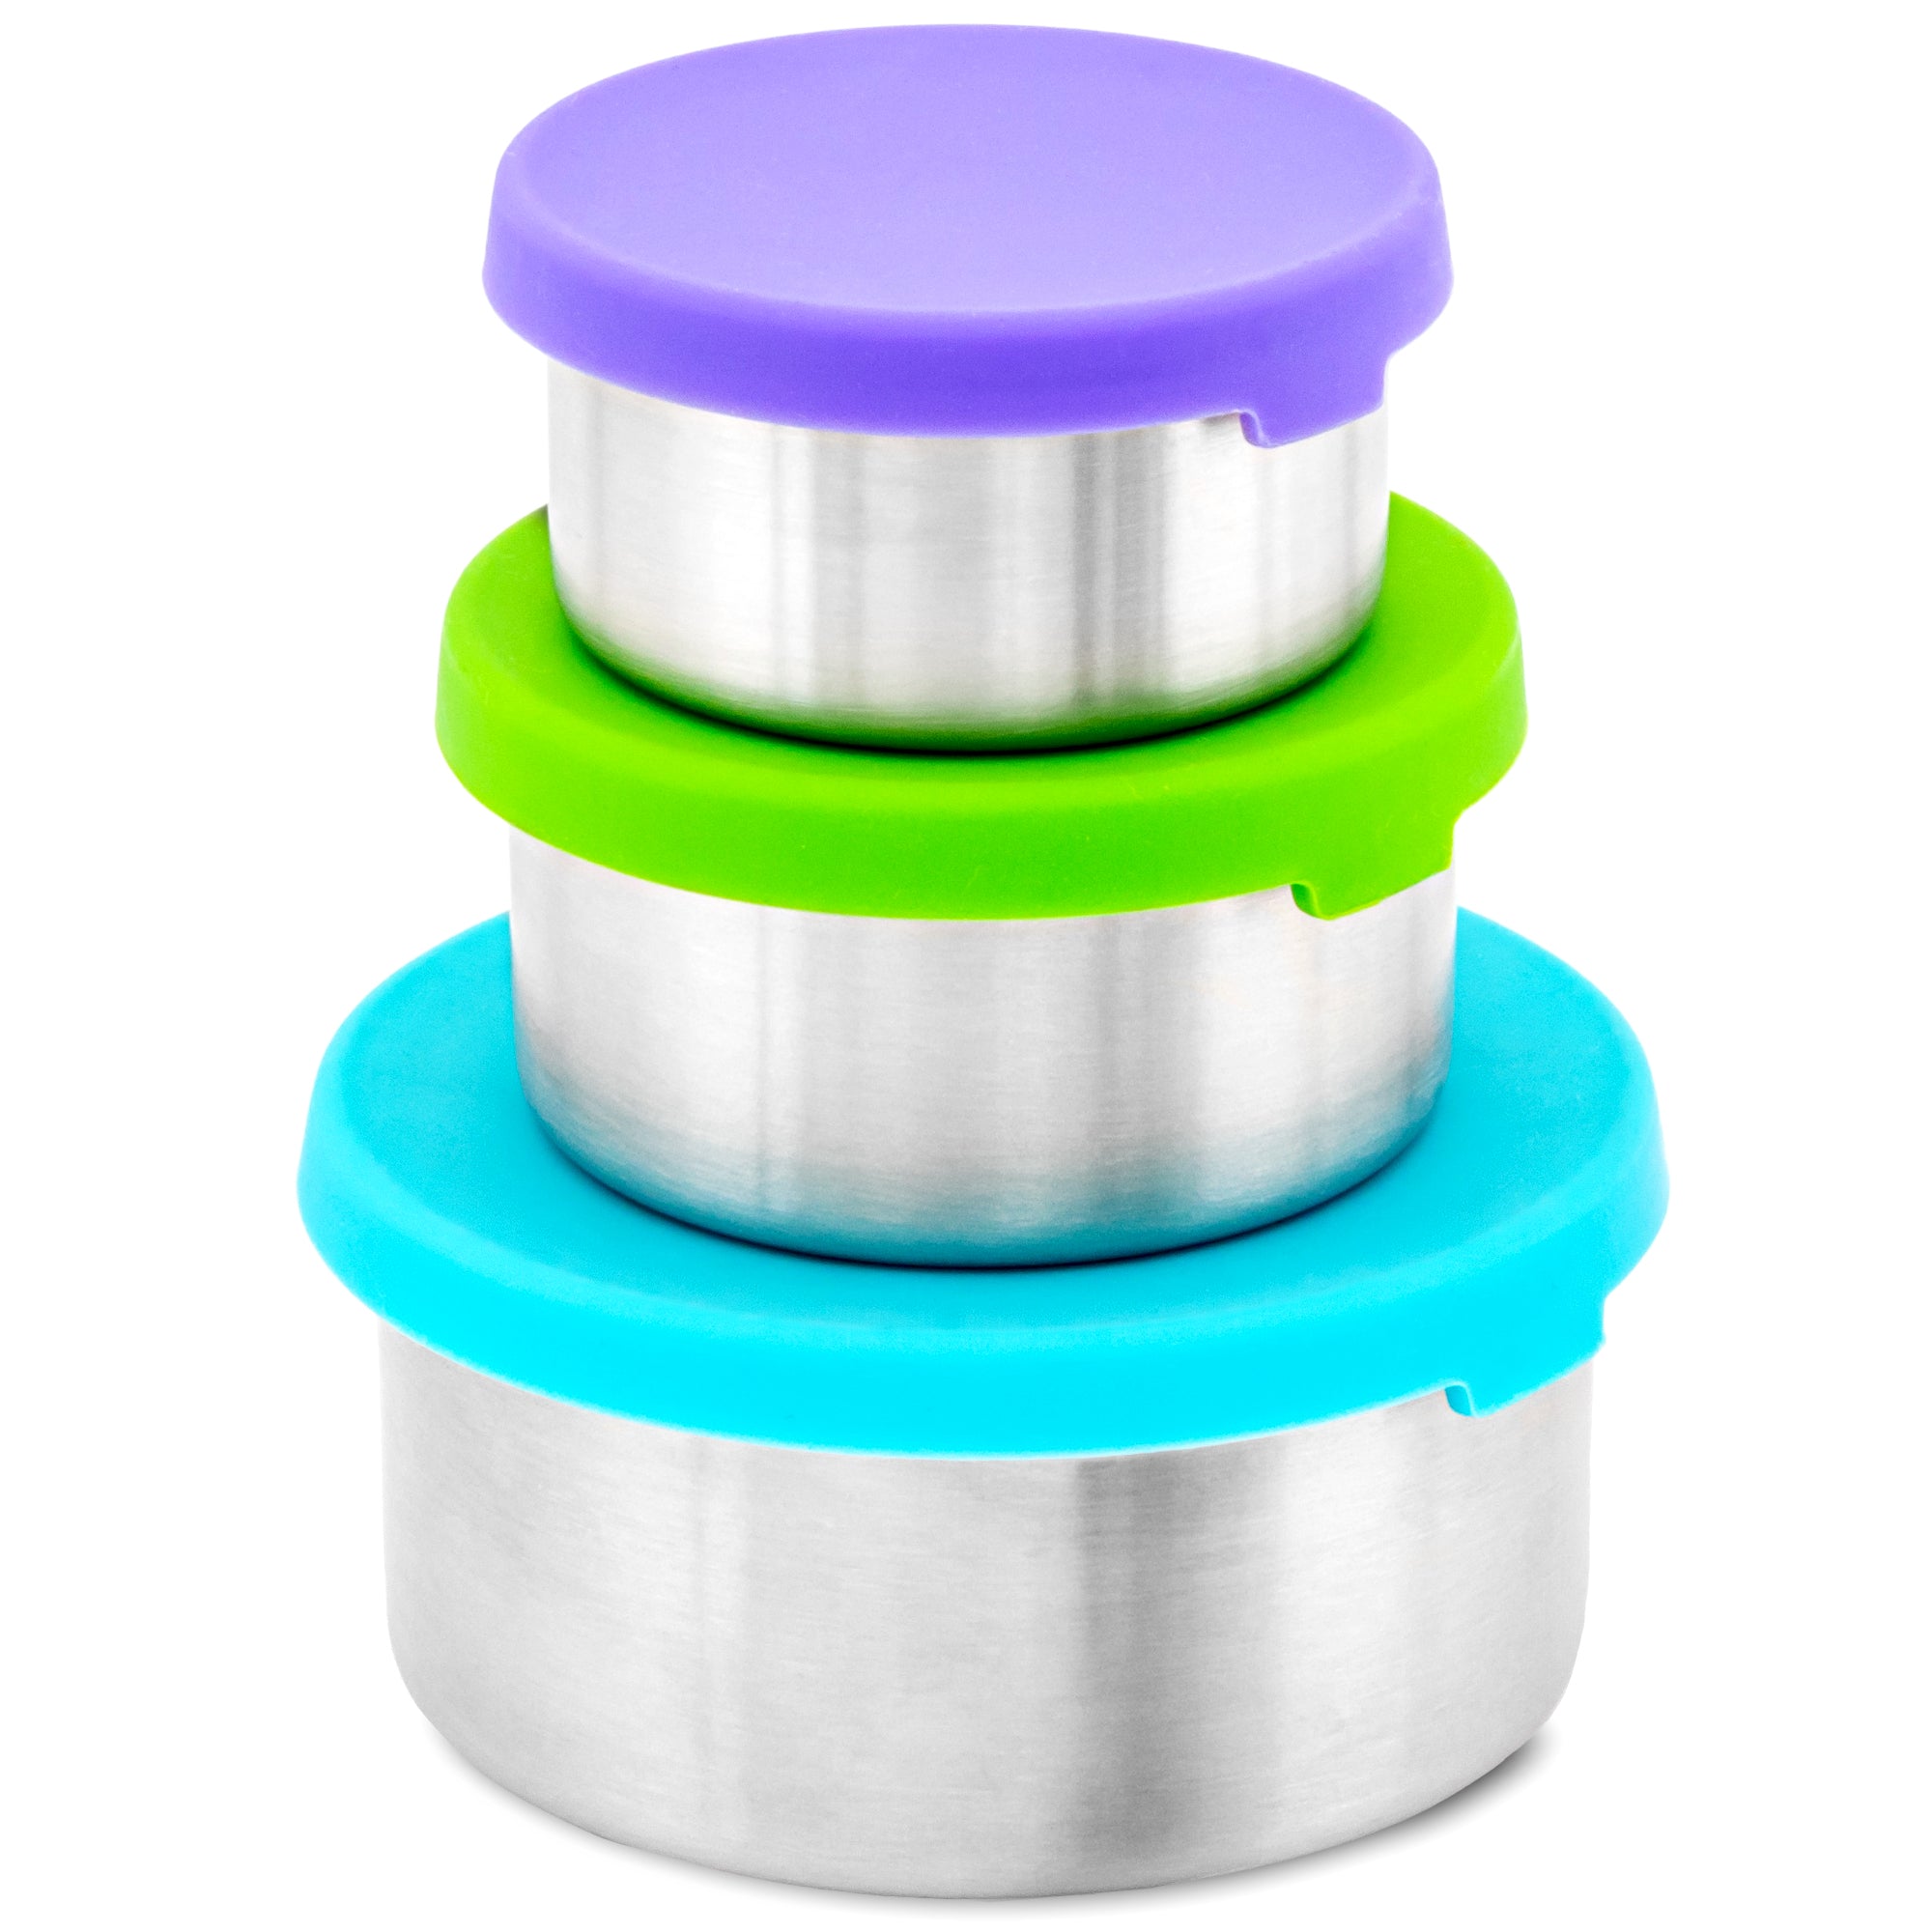 6Pack 6oz Stainless Steel Snack Containers for Kids, Easy Open Leak Proof  Small Stainless Steel Snack Containers with Silicone Lids, Small Snack